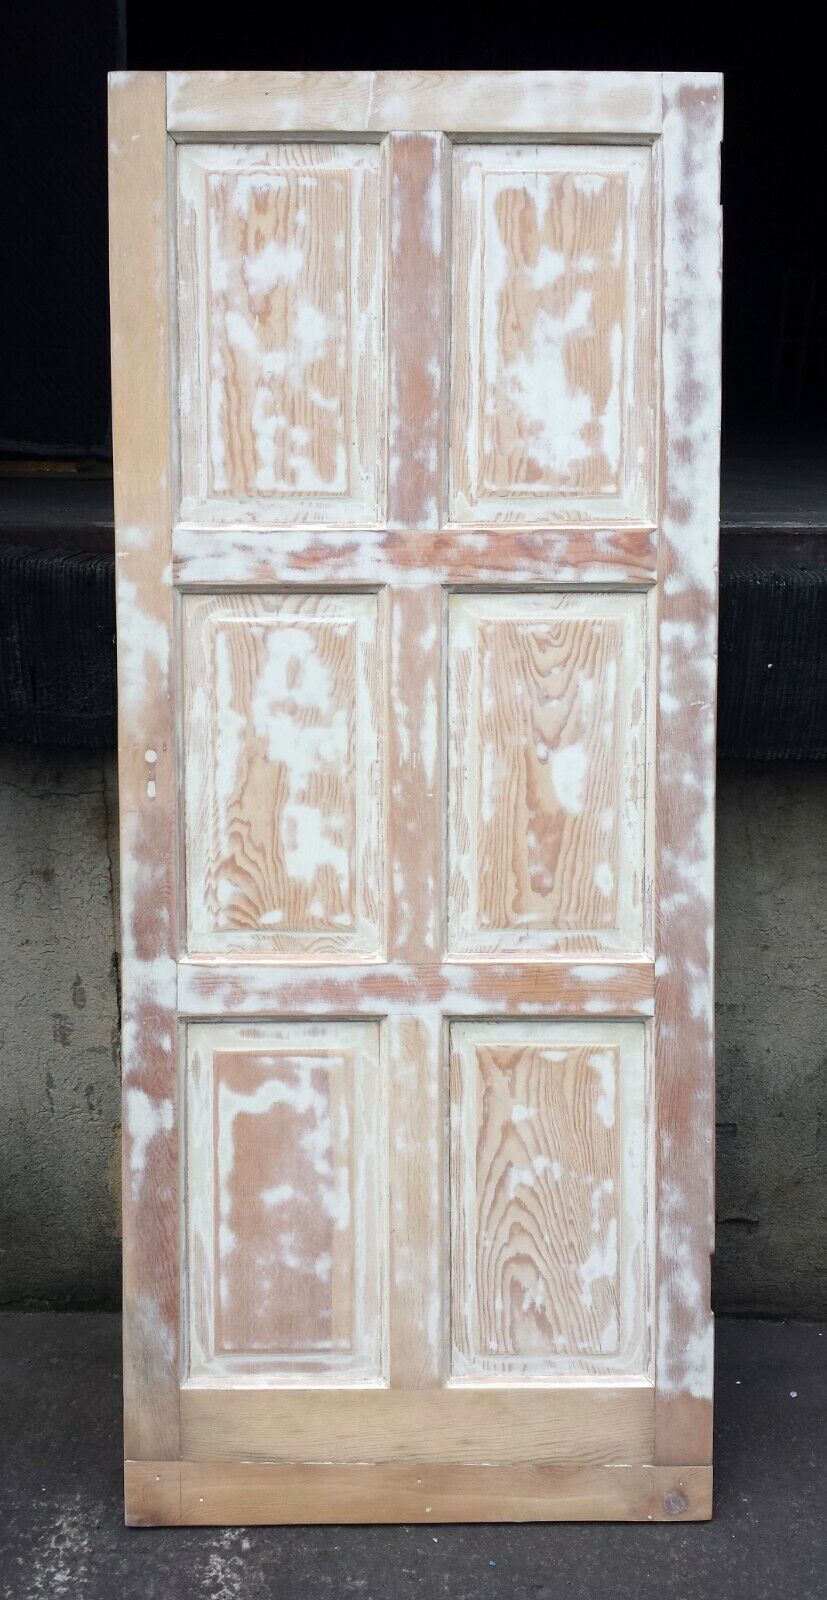 30"x69" Antique Vintage Old Reclaimed Salvaged Interior SOLID Wood Wooden Doors 6 Panels